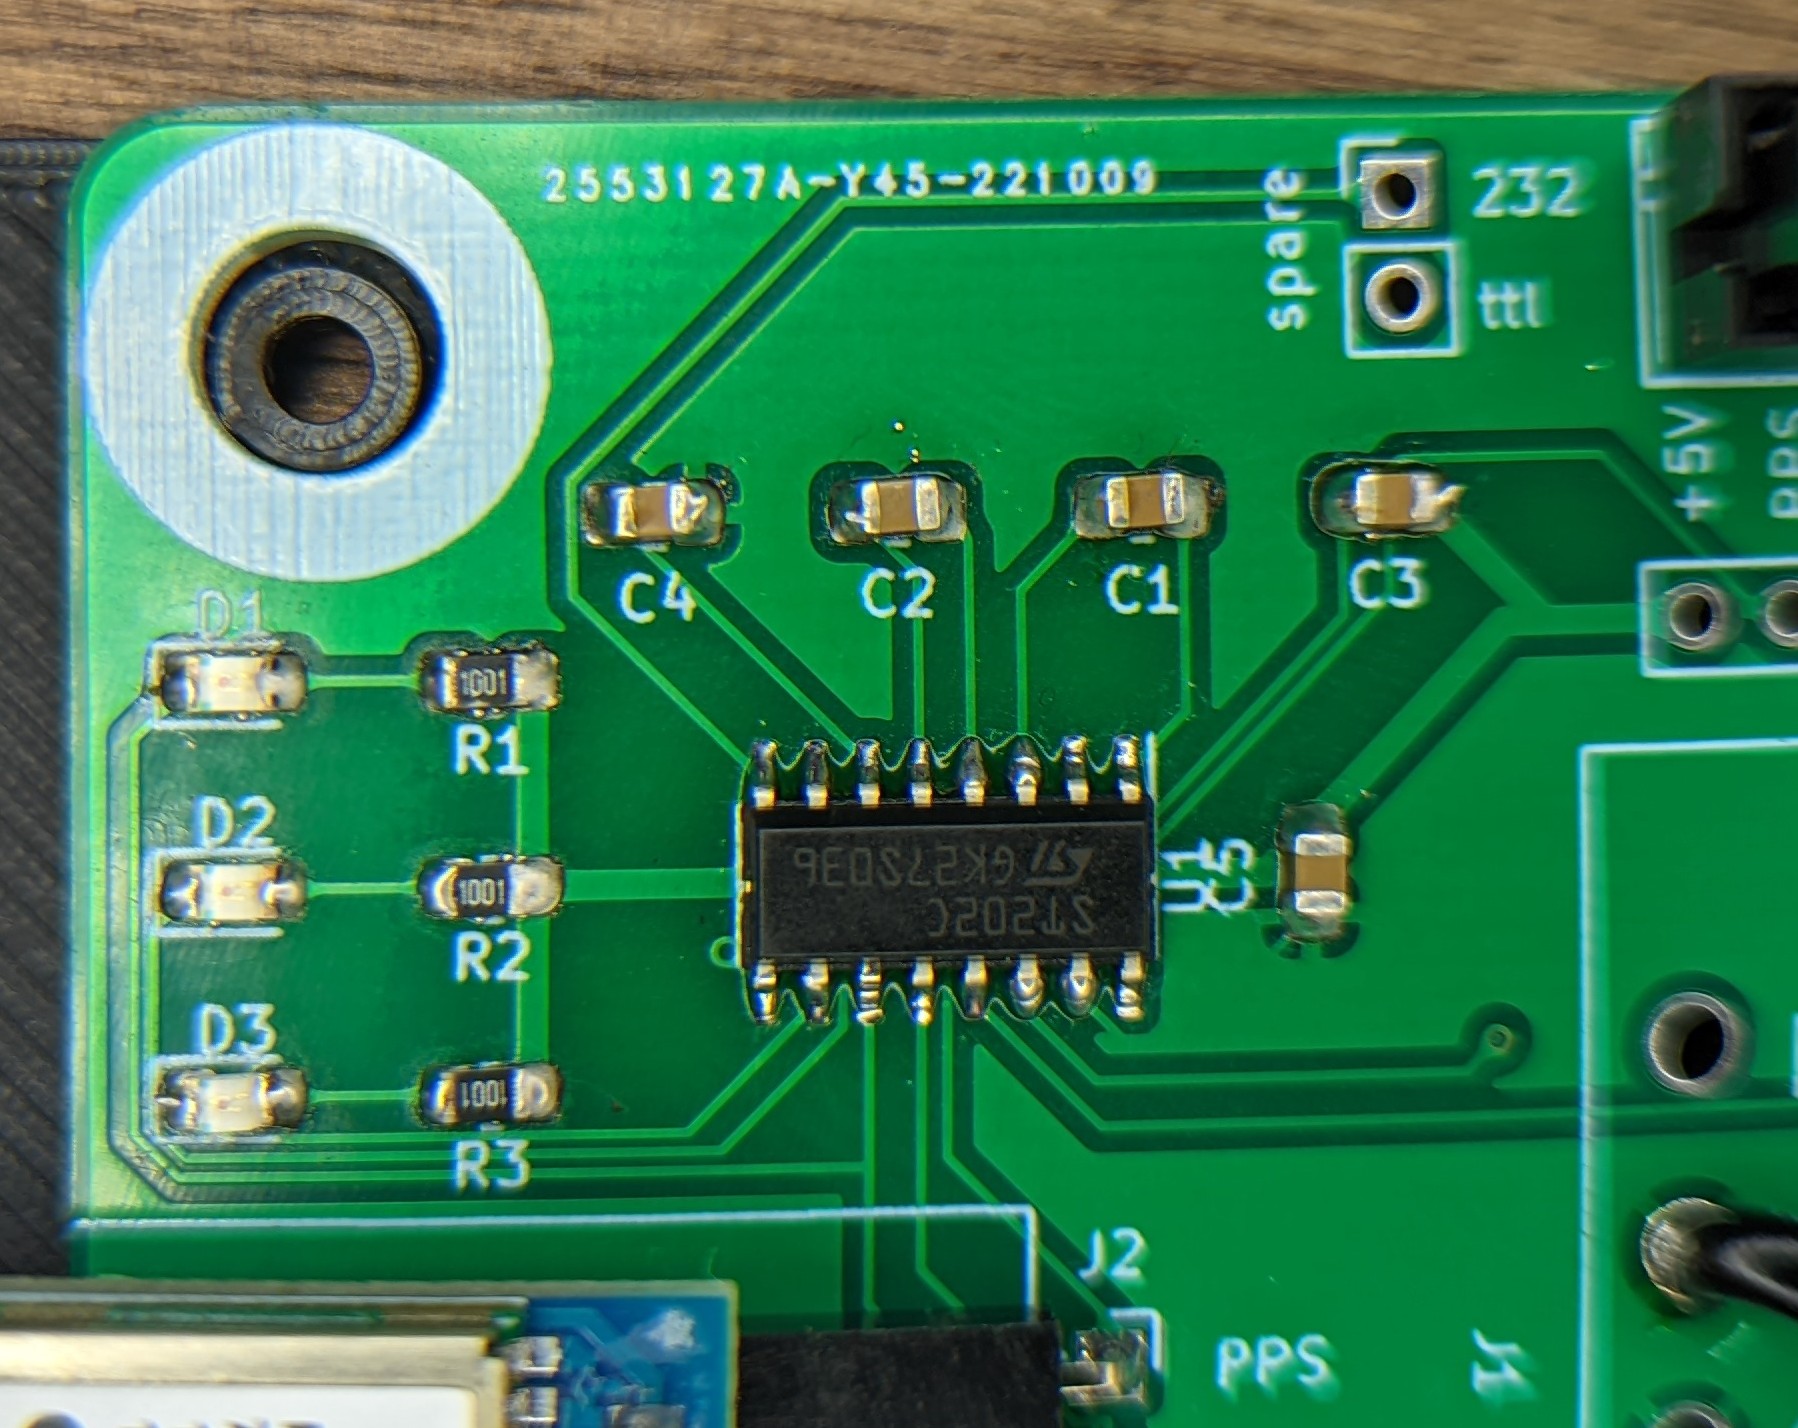 Super close up of the chip installed properly. In this picture, pin1 is top right.